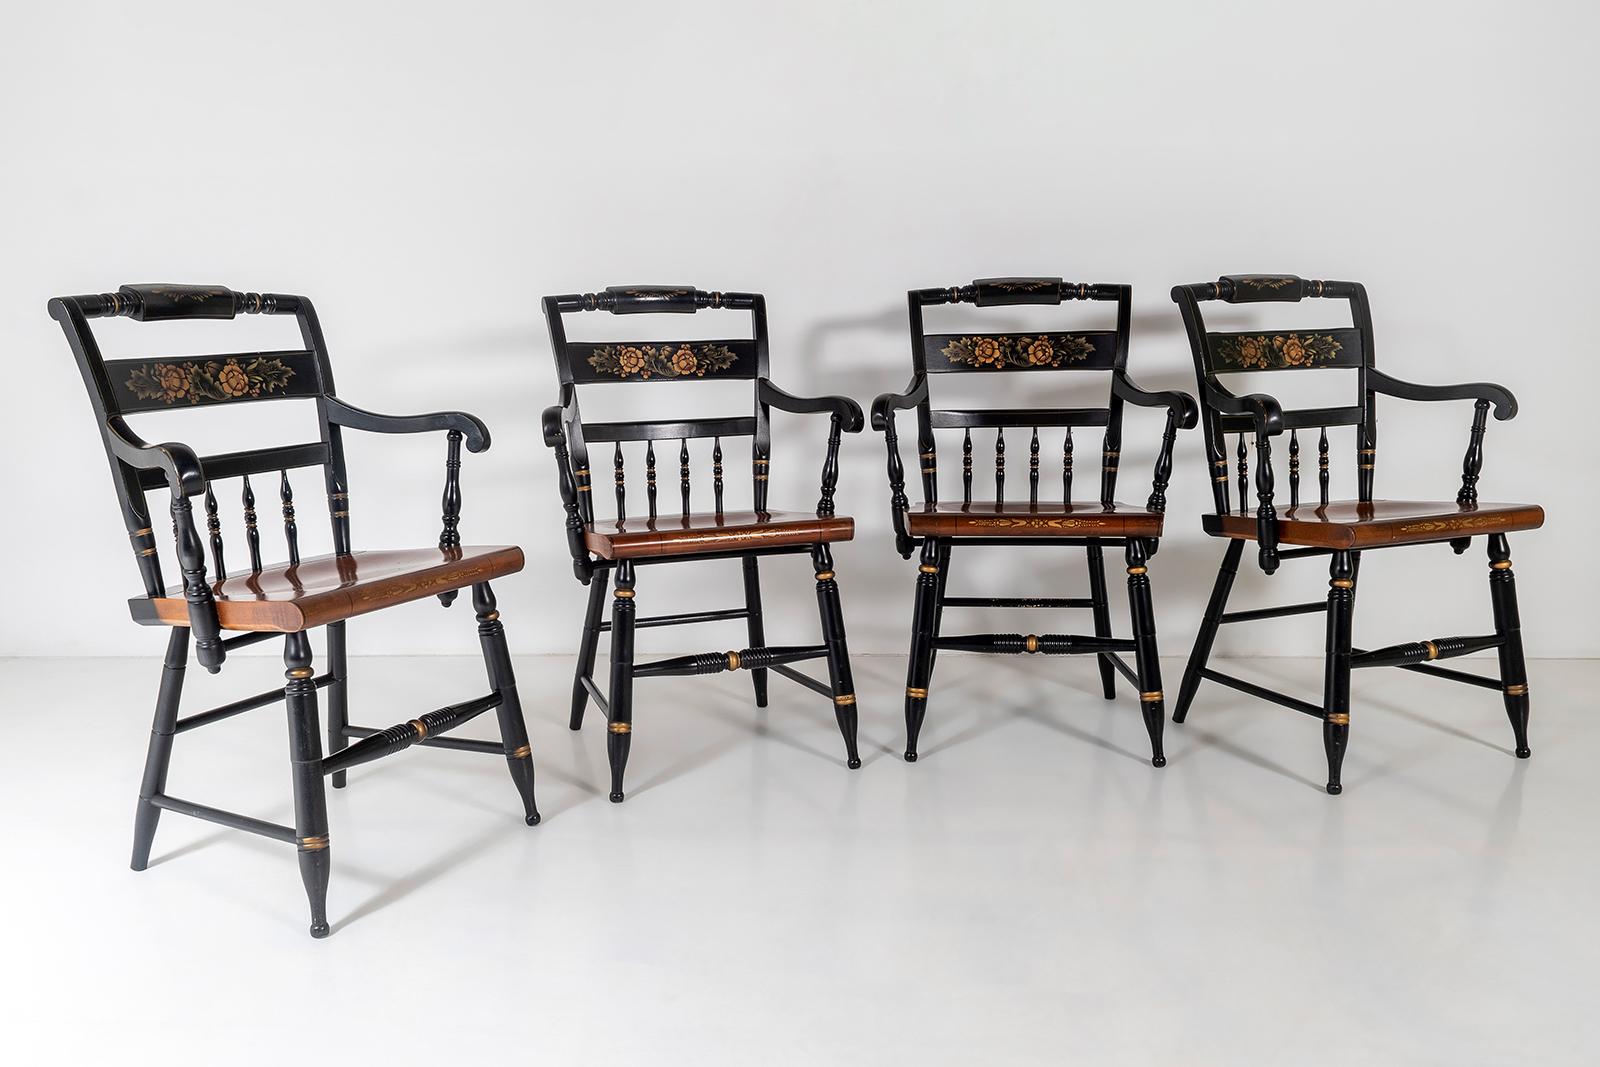 Vintage L. Hitchcock black stencilled Harvest painted maple dining chairs.
A set of 4, beautifully crafted and of high quality manufacture in superb condition. Features black ebonised finish, stencil painted harvest design, quality American